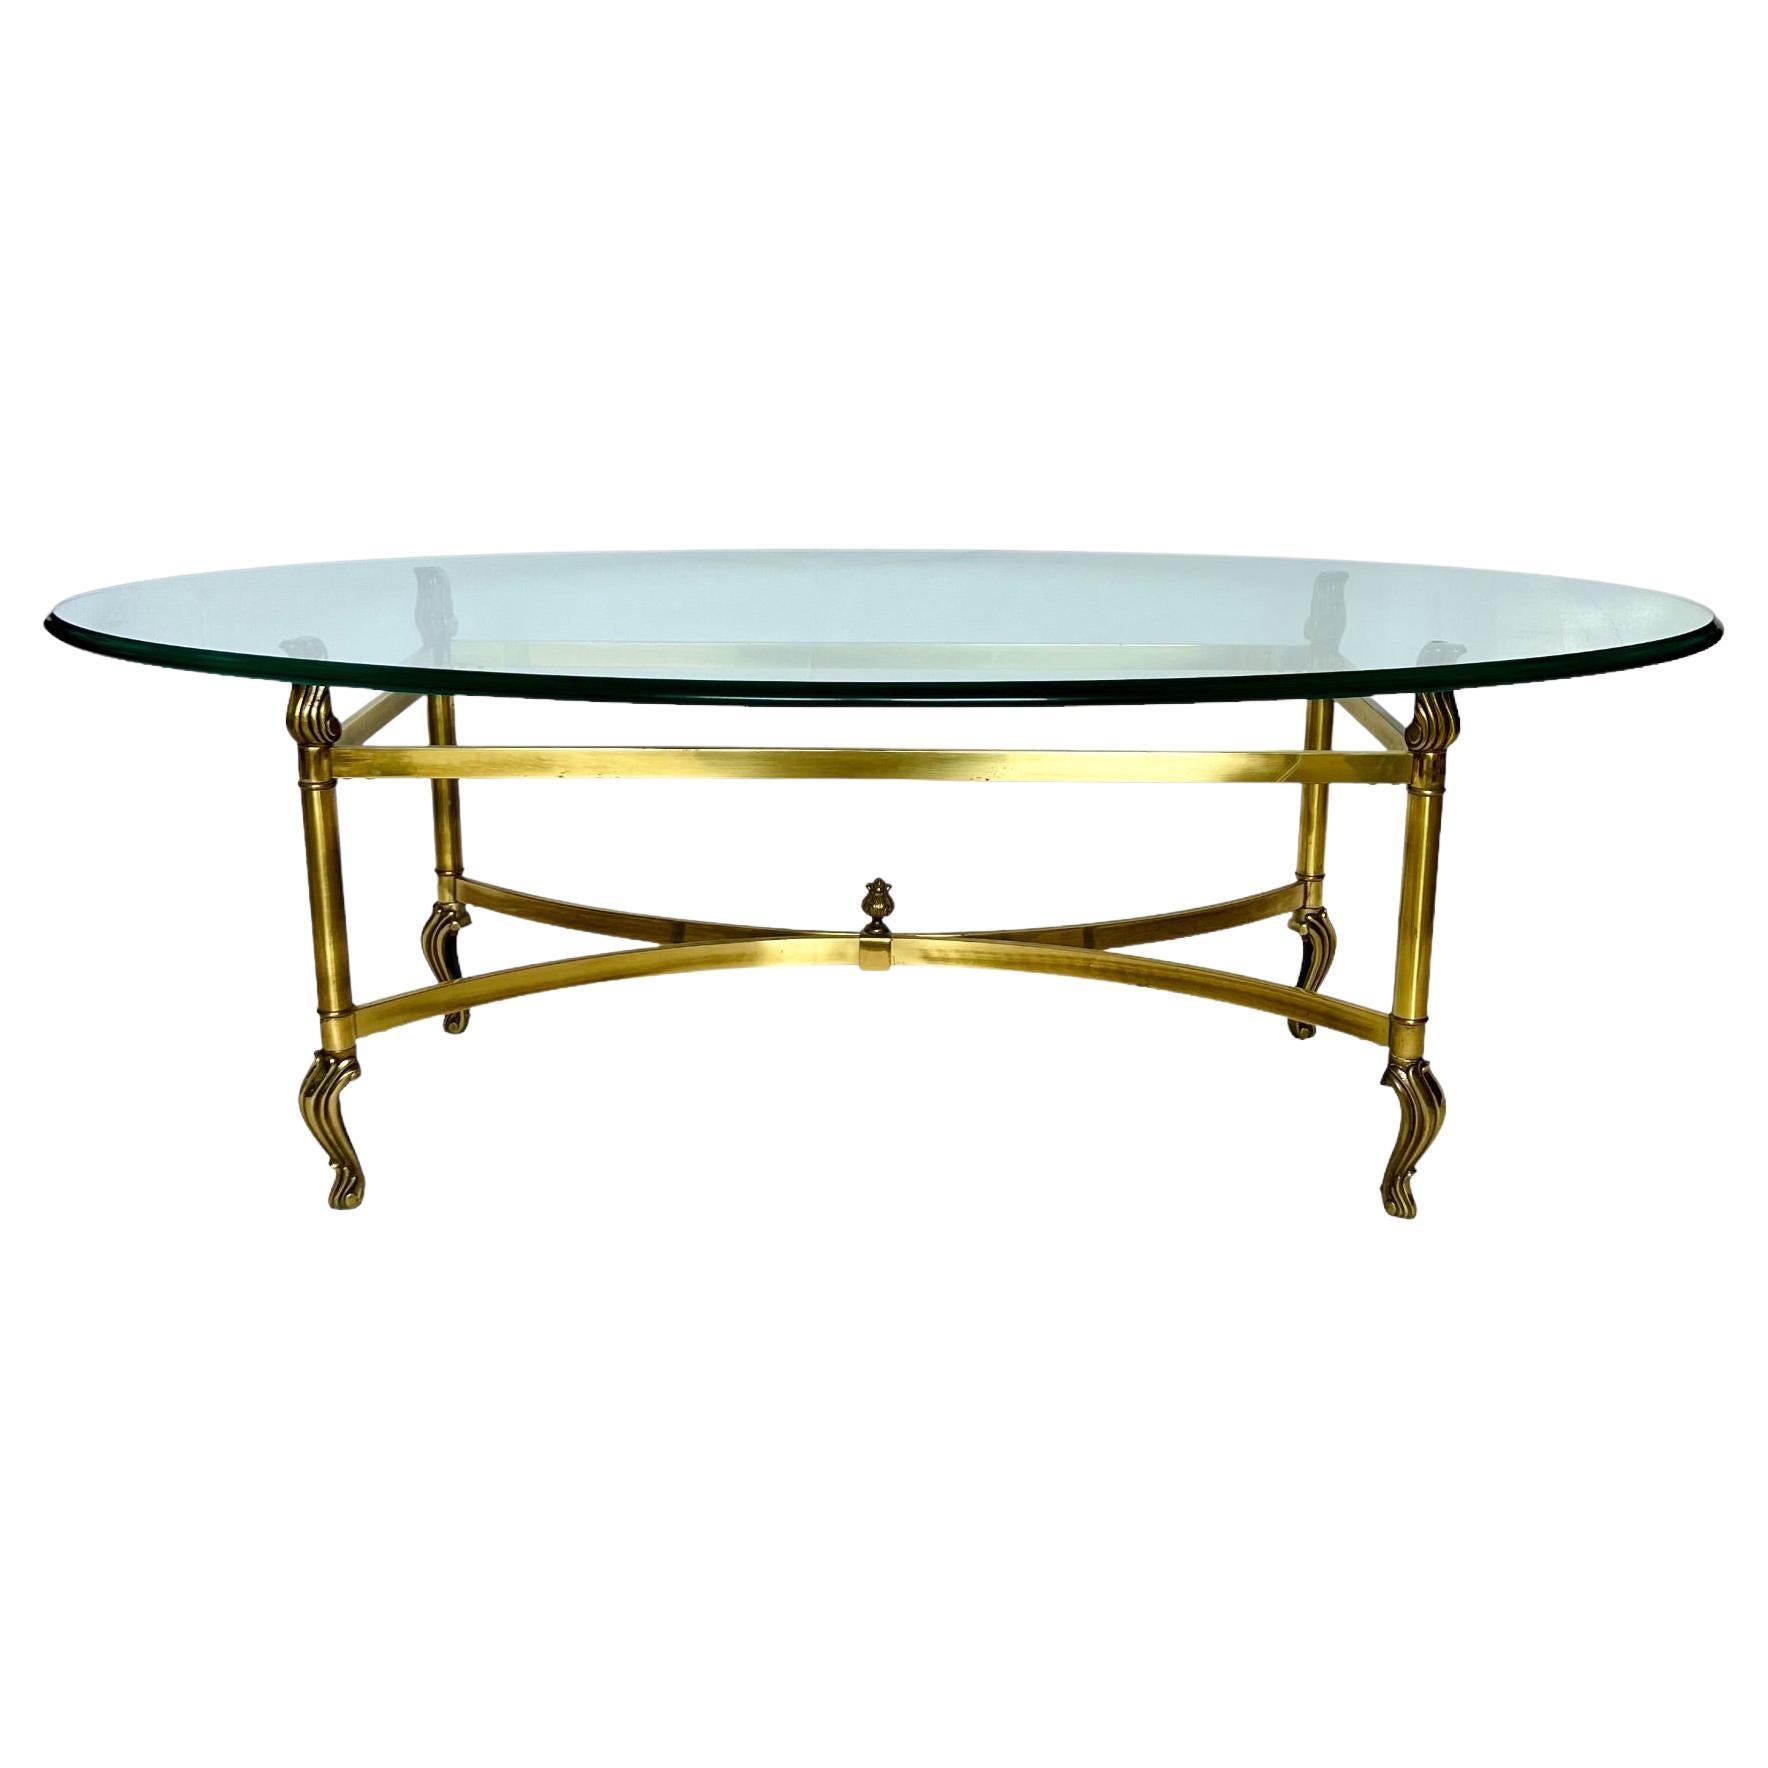 Neoclassical Brass Oval Glass Top Coffee Table, Late 20th C.